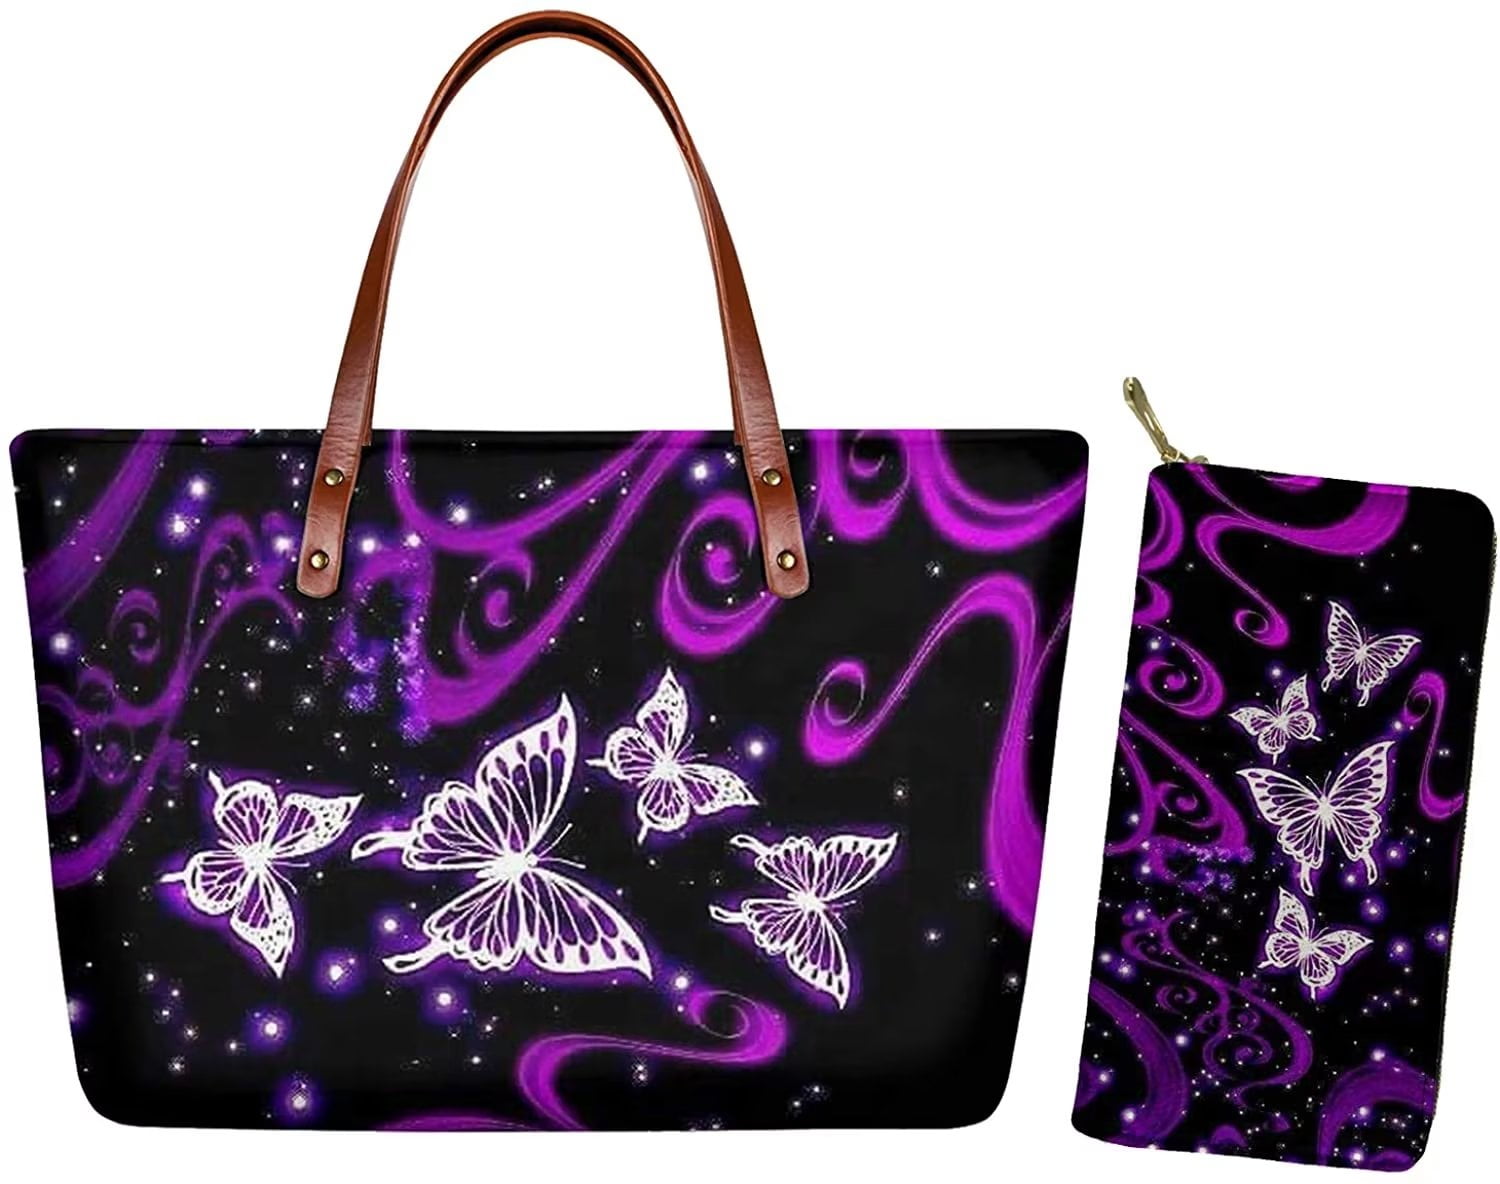 Handpainted Butterfly Bag | Shop.PBS.org